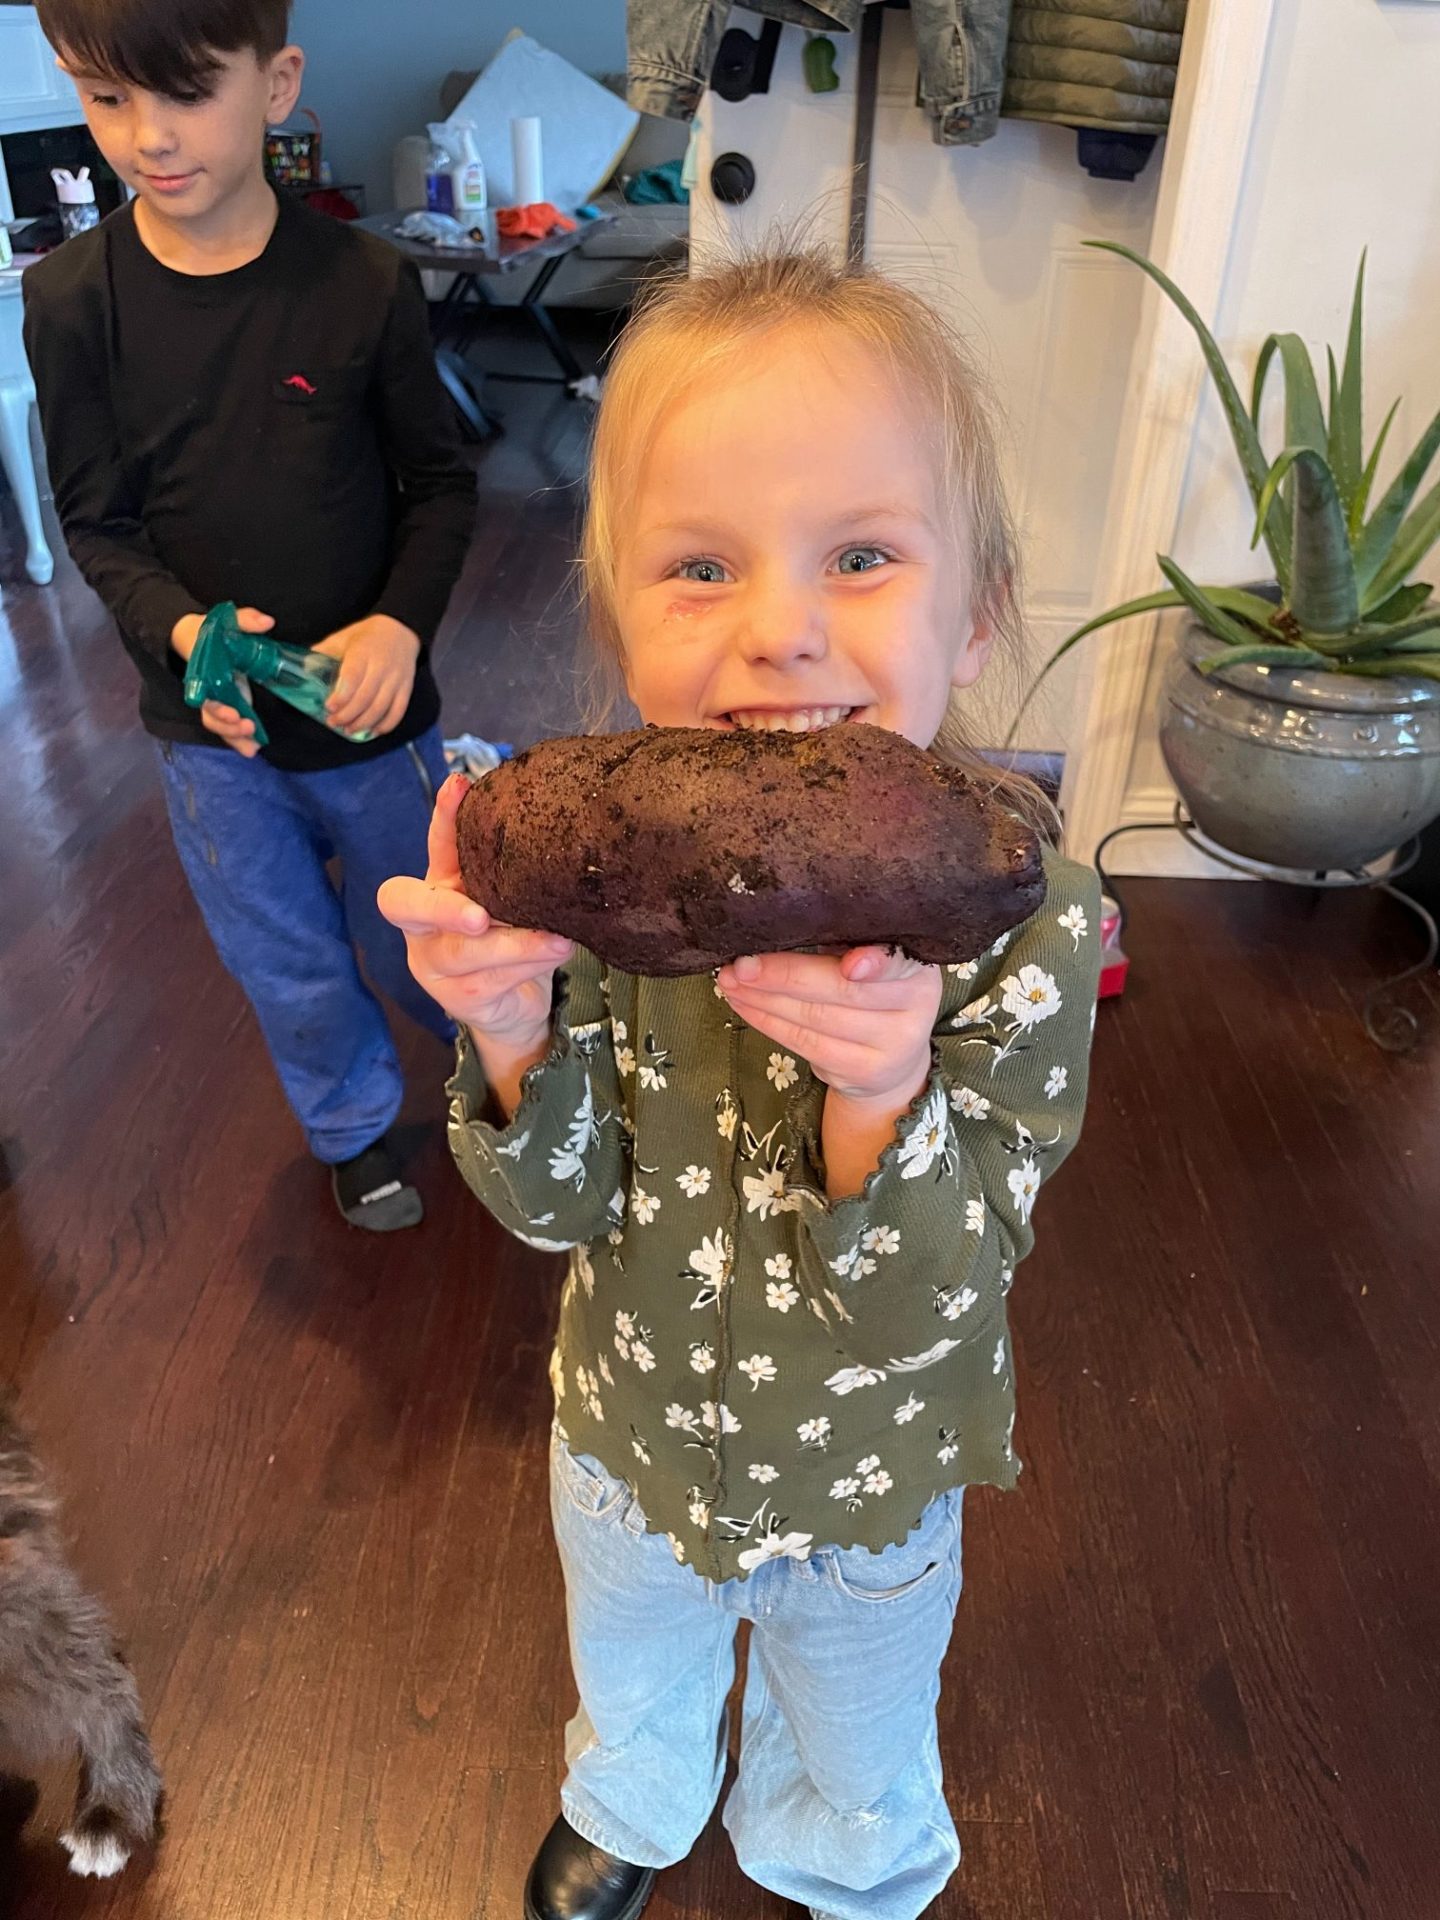 A young girl holding a purple potato she just harvested.